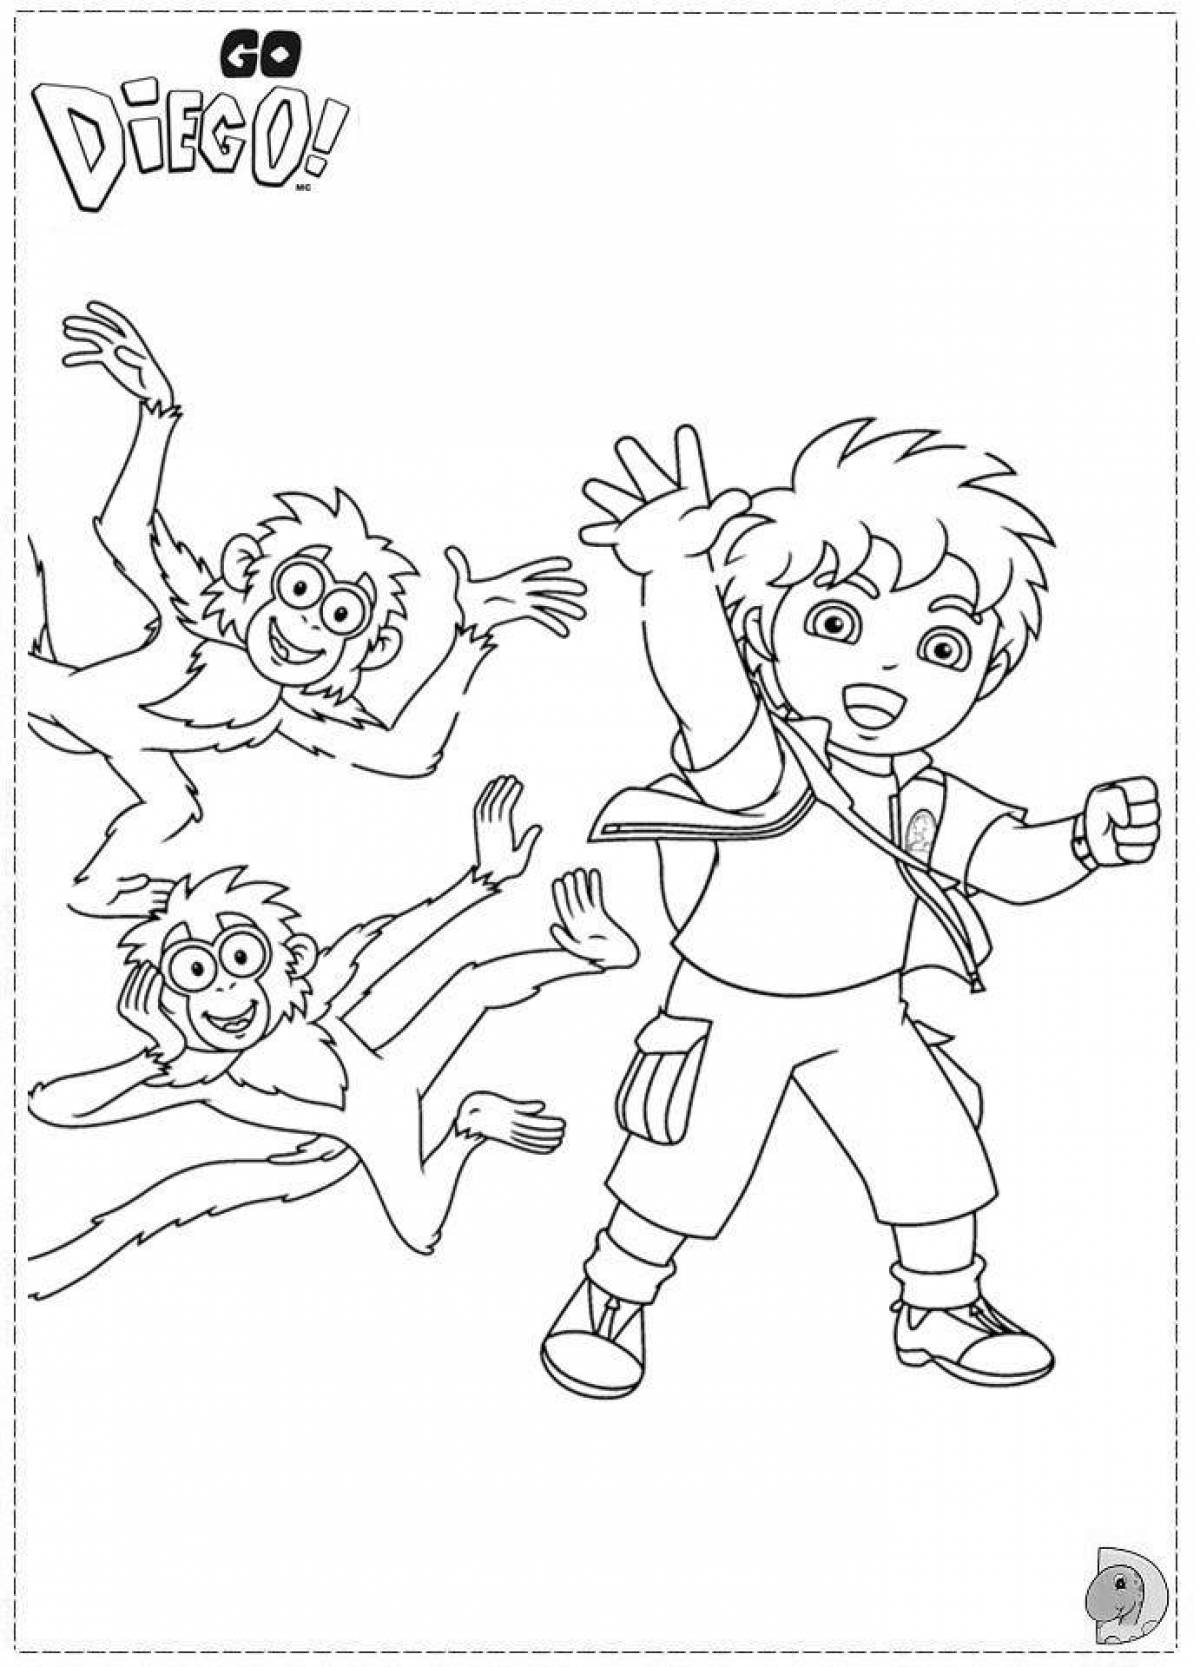 Diego Go's fascinating coloring page